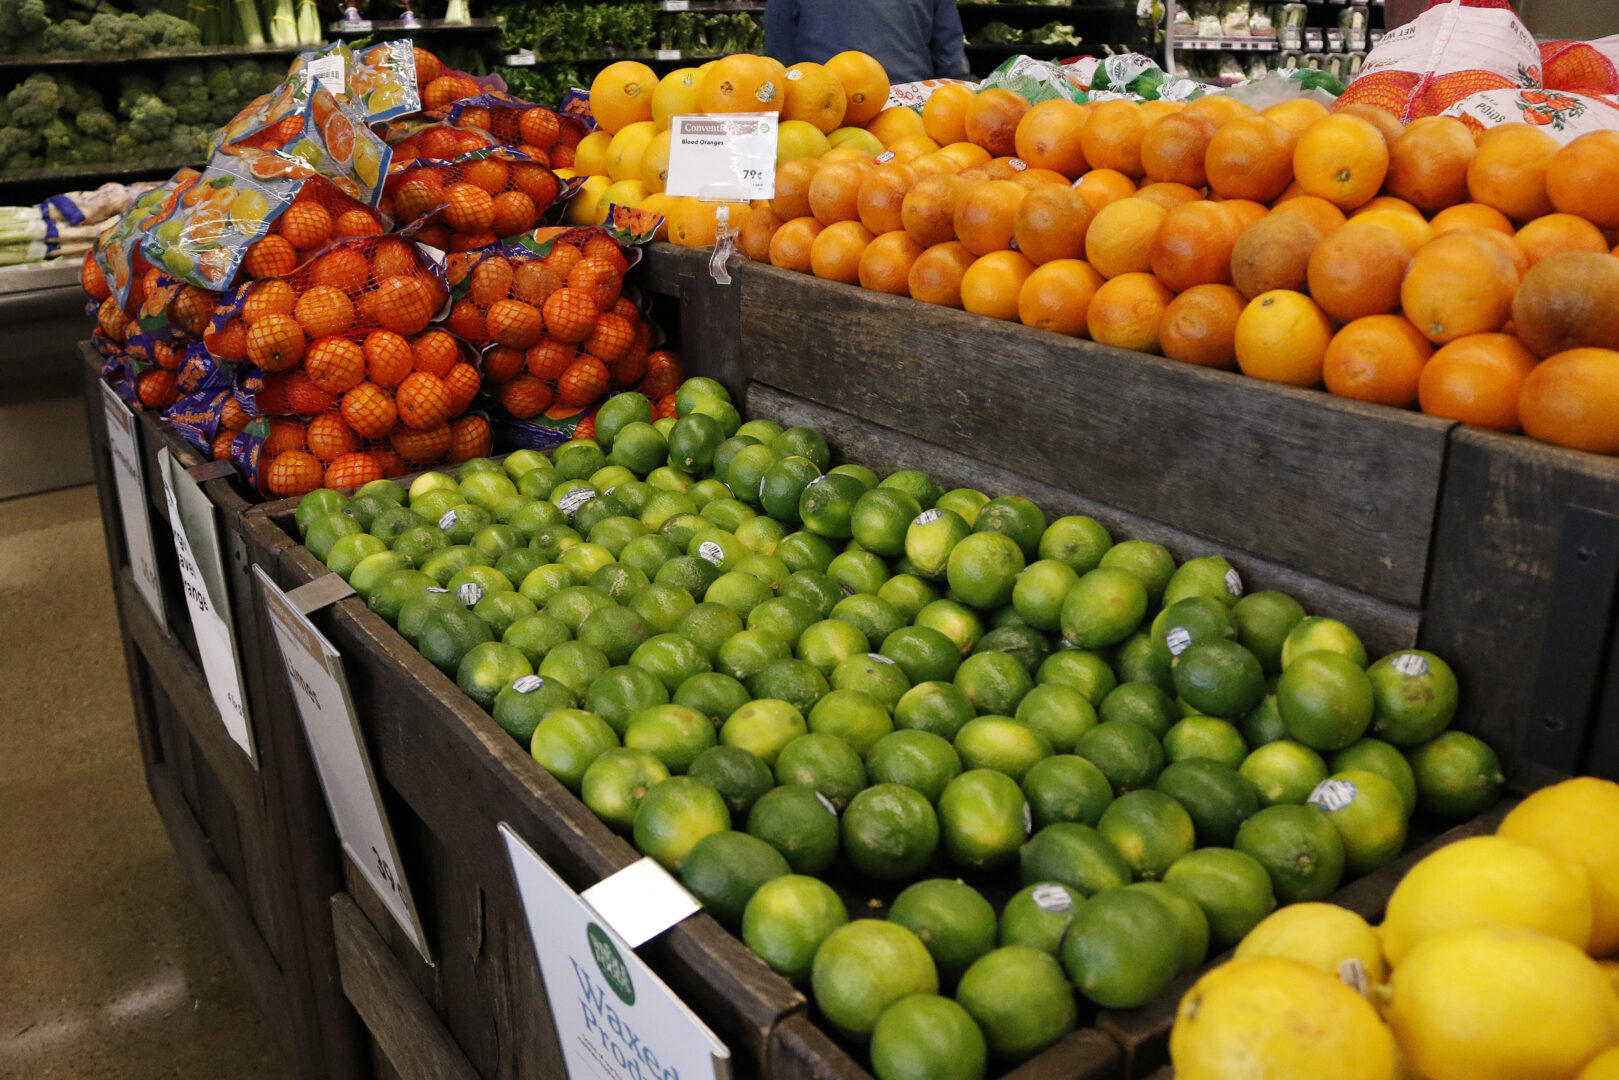 On May 3, 2017, the photo shows a display of fruit at the Whole Foods grocery store in Upper Saint Clair, Pennsylvania. 